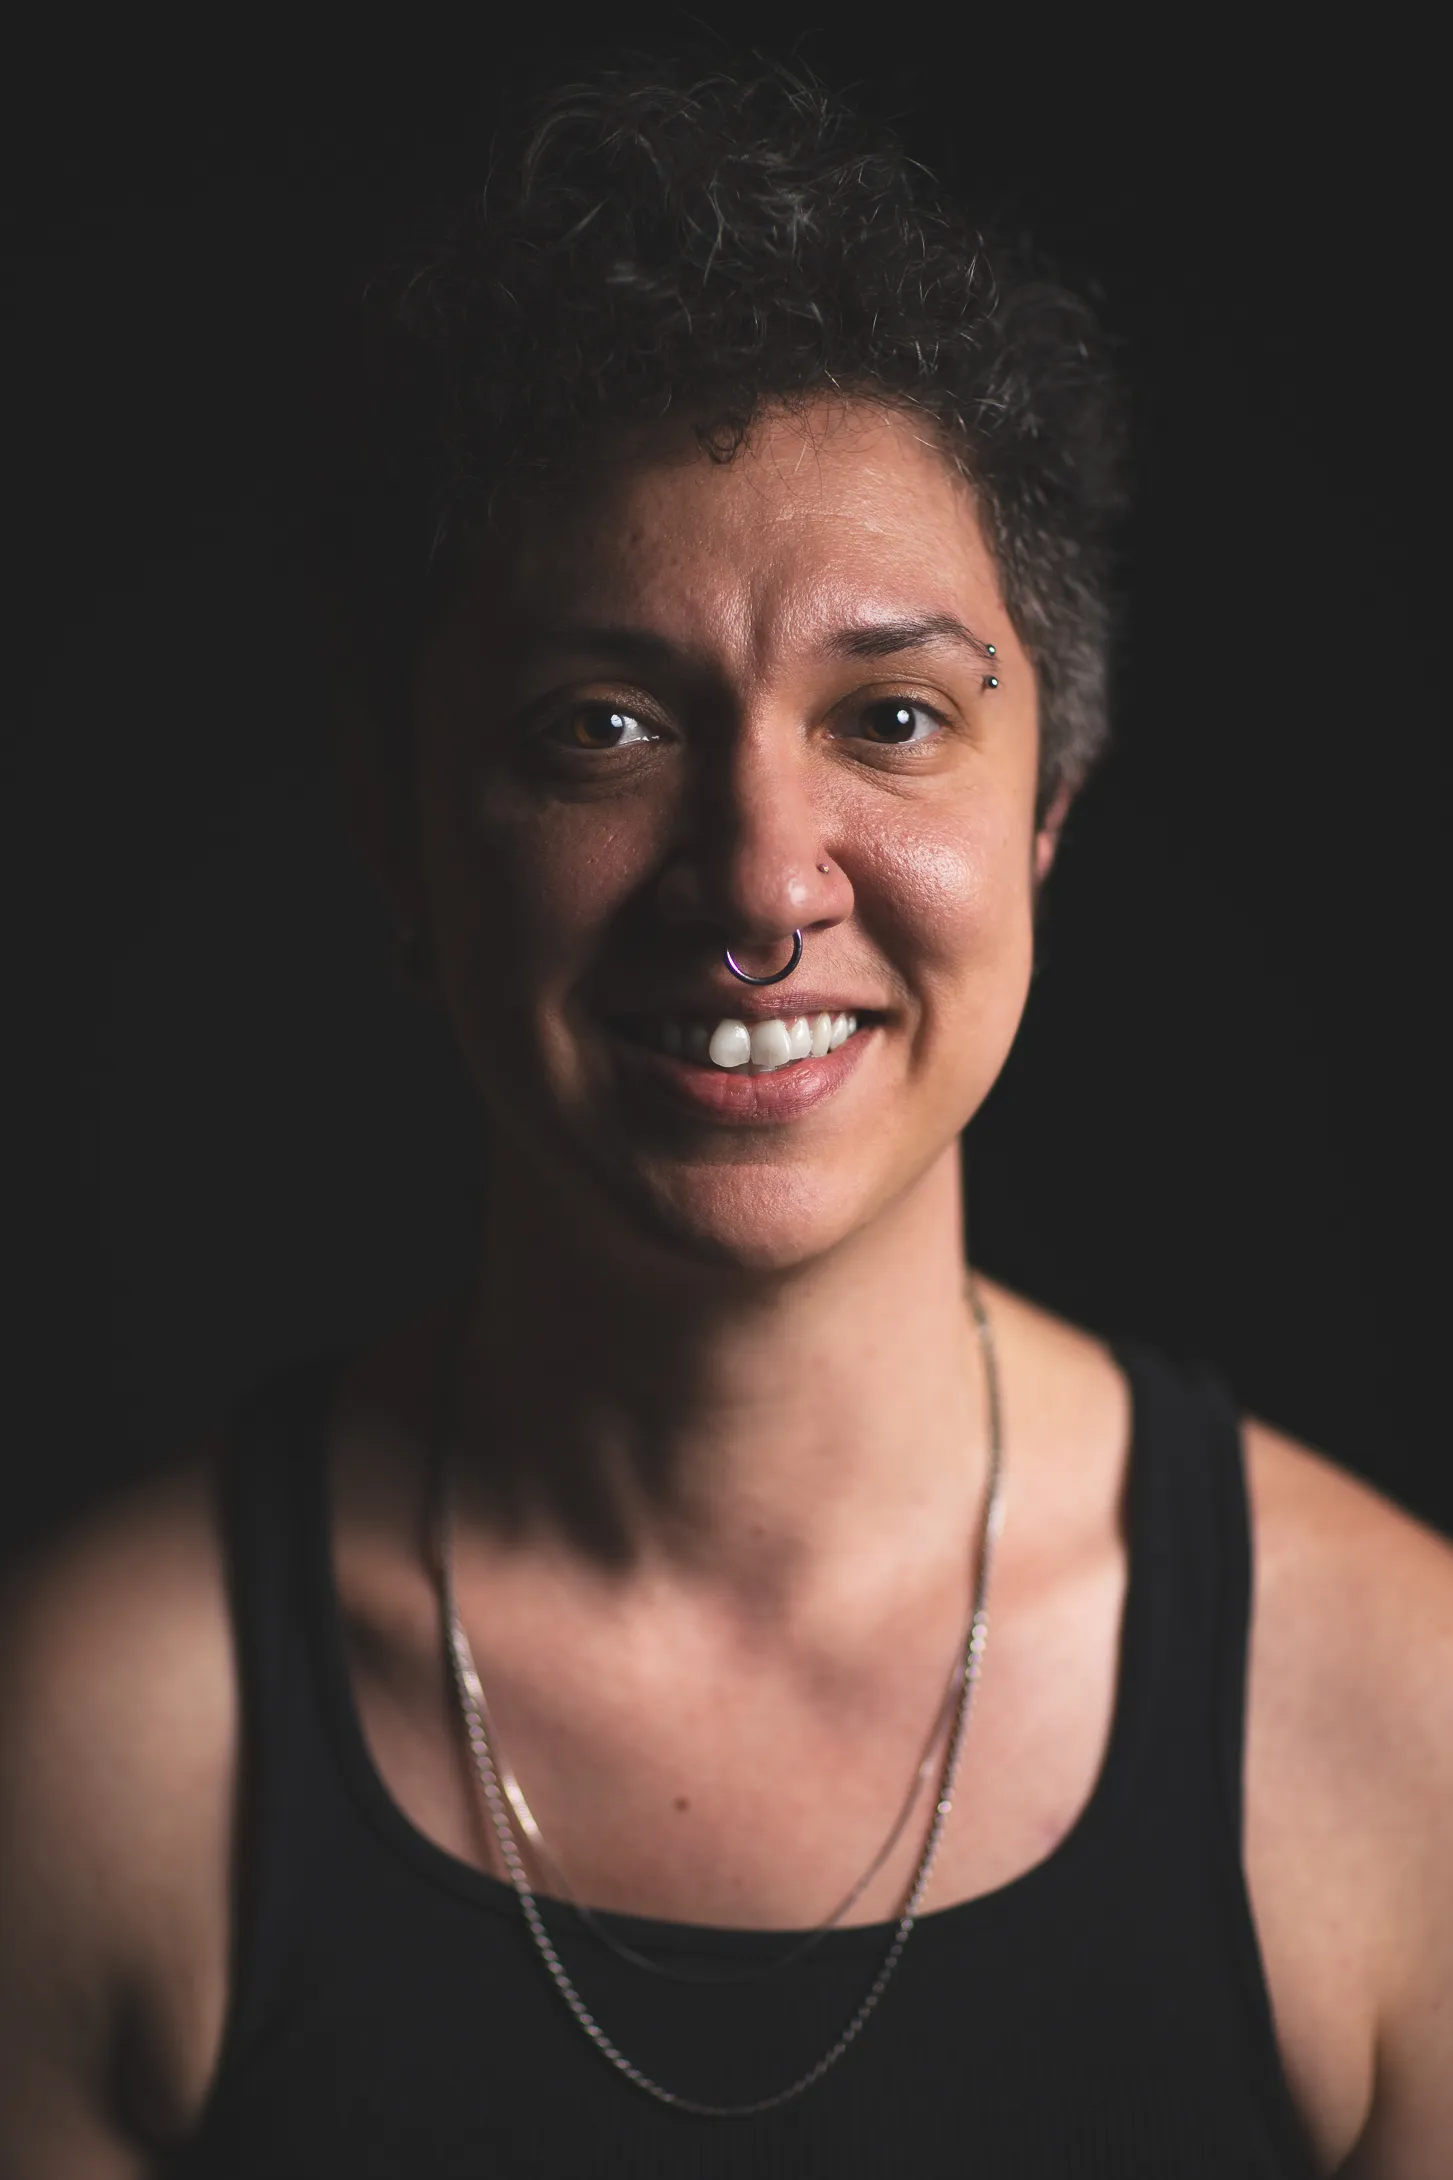 A portrait of Fox Moon, the massage therapist, as they smile in front of a black background.